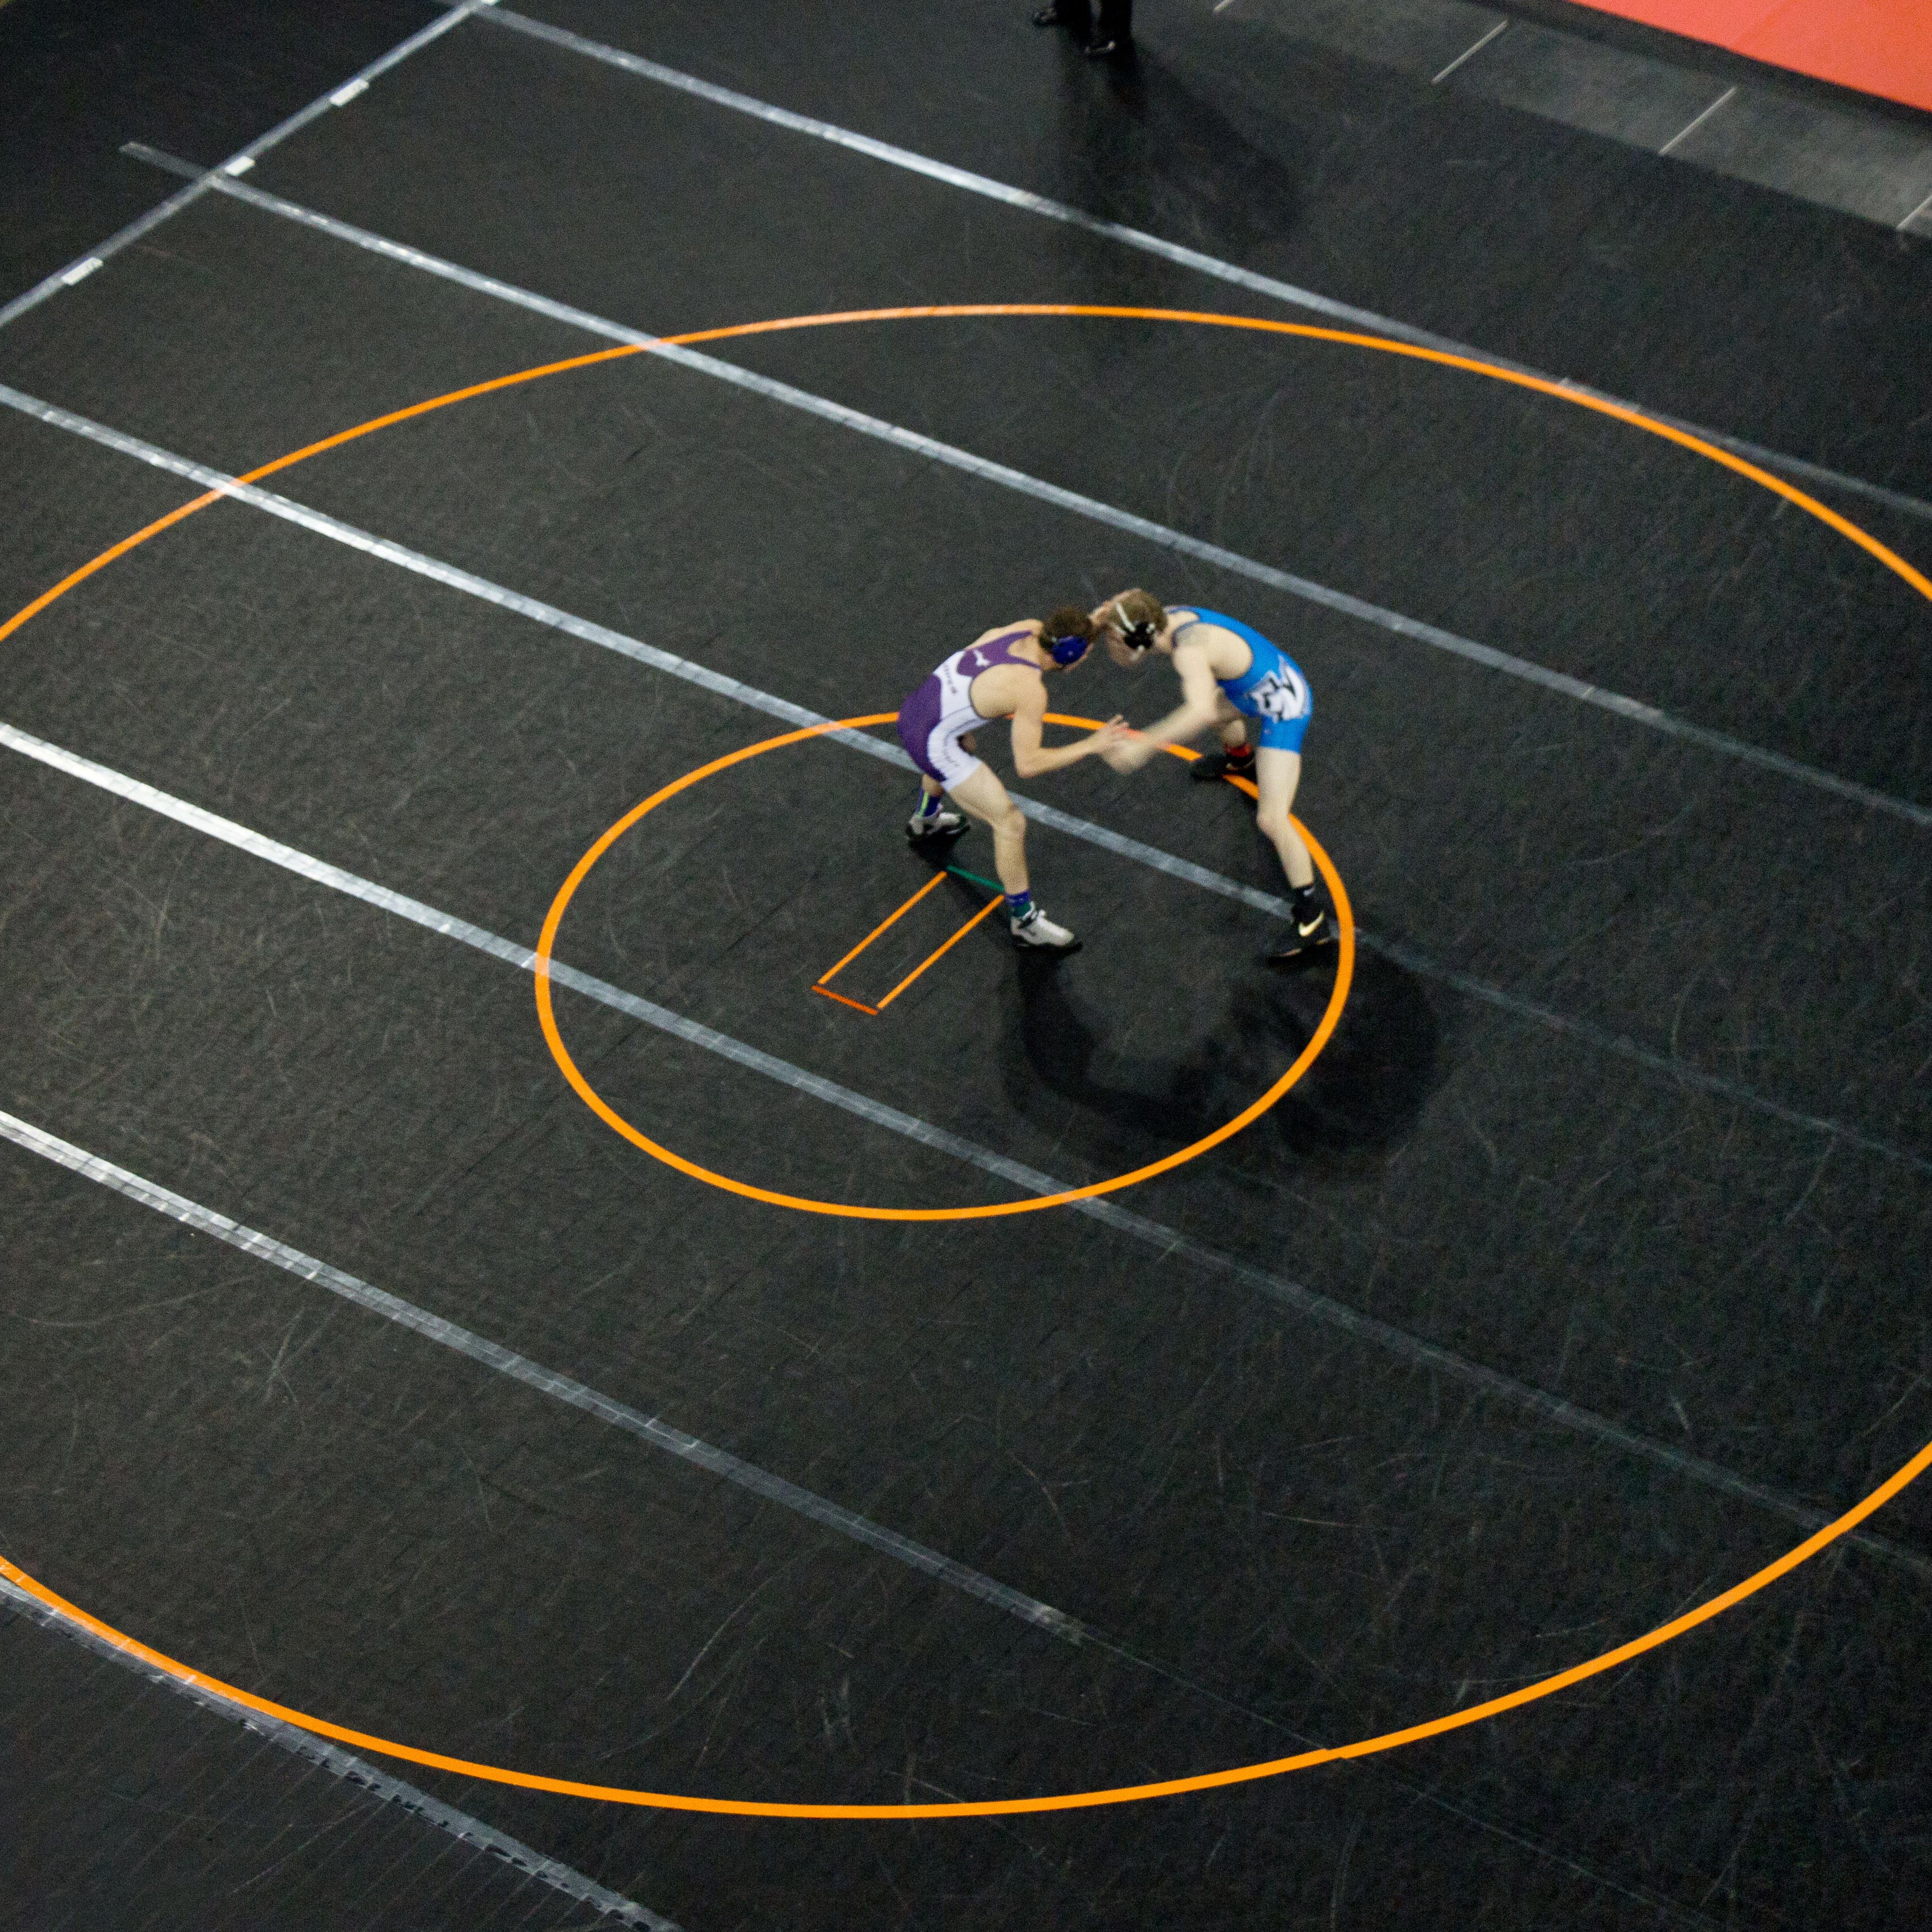 wrestlers in competition on mats